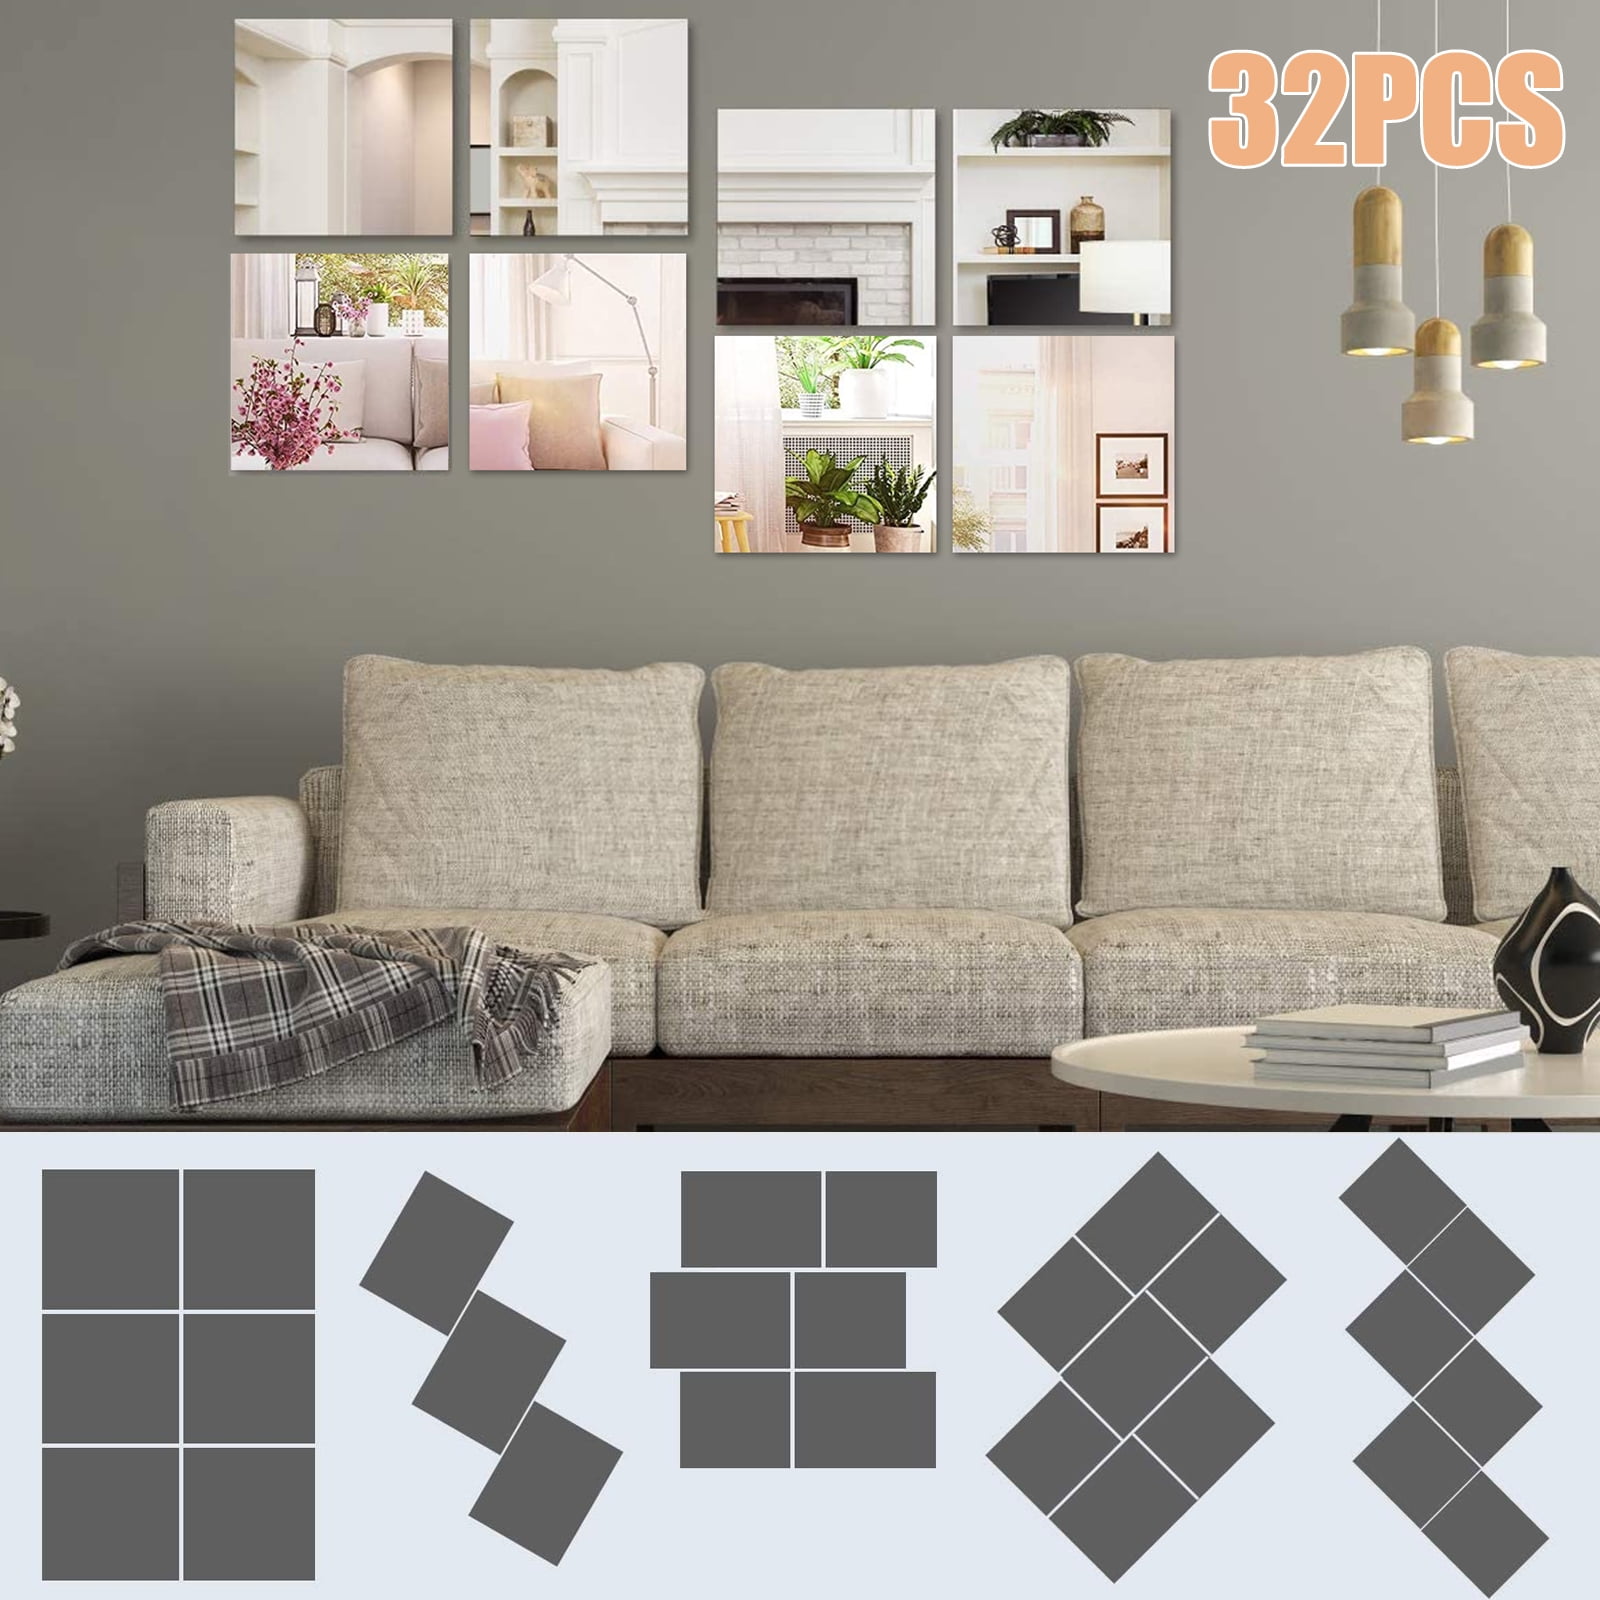 Fancy 16pcs Self Adhesive Mirror Tiles Wall Mirror Stickers Flexible Non Glass Mirror Sheets for Home Living Room Wall Decor 5.9 inch*5.9 inch Silver